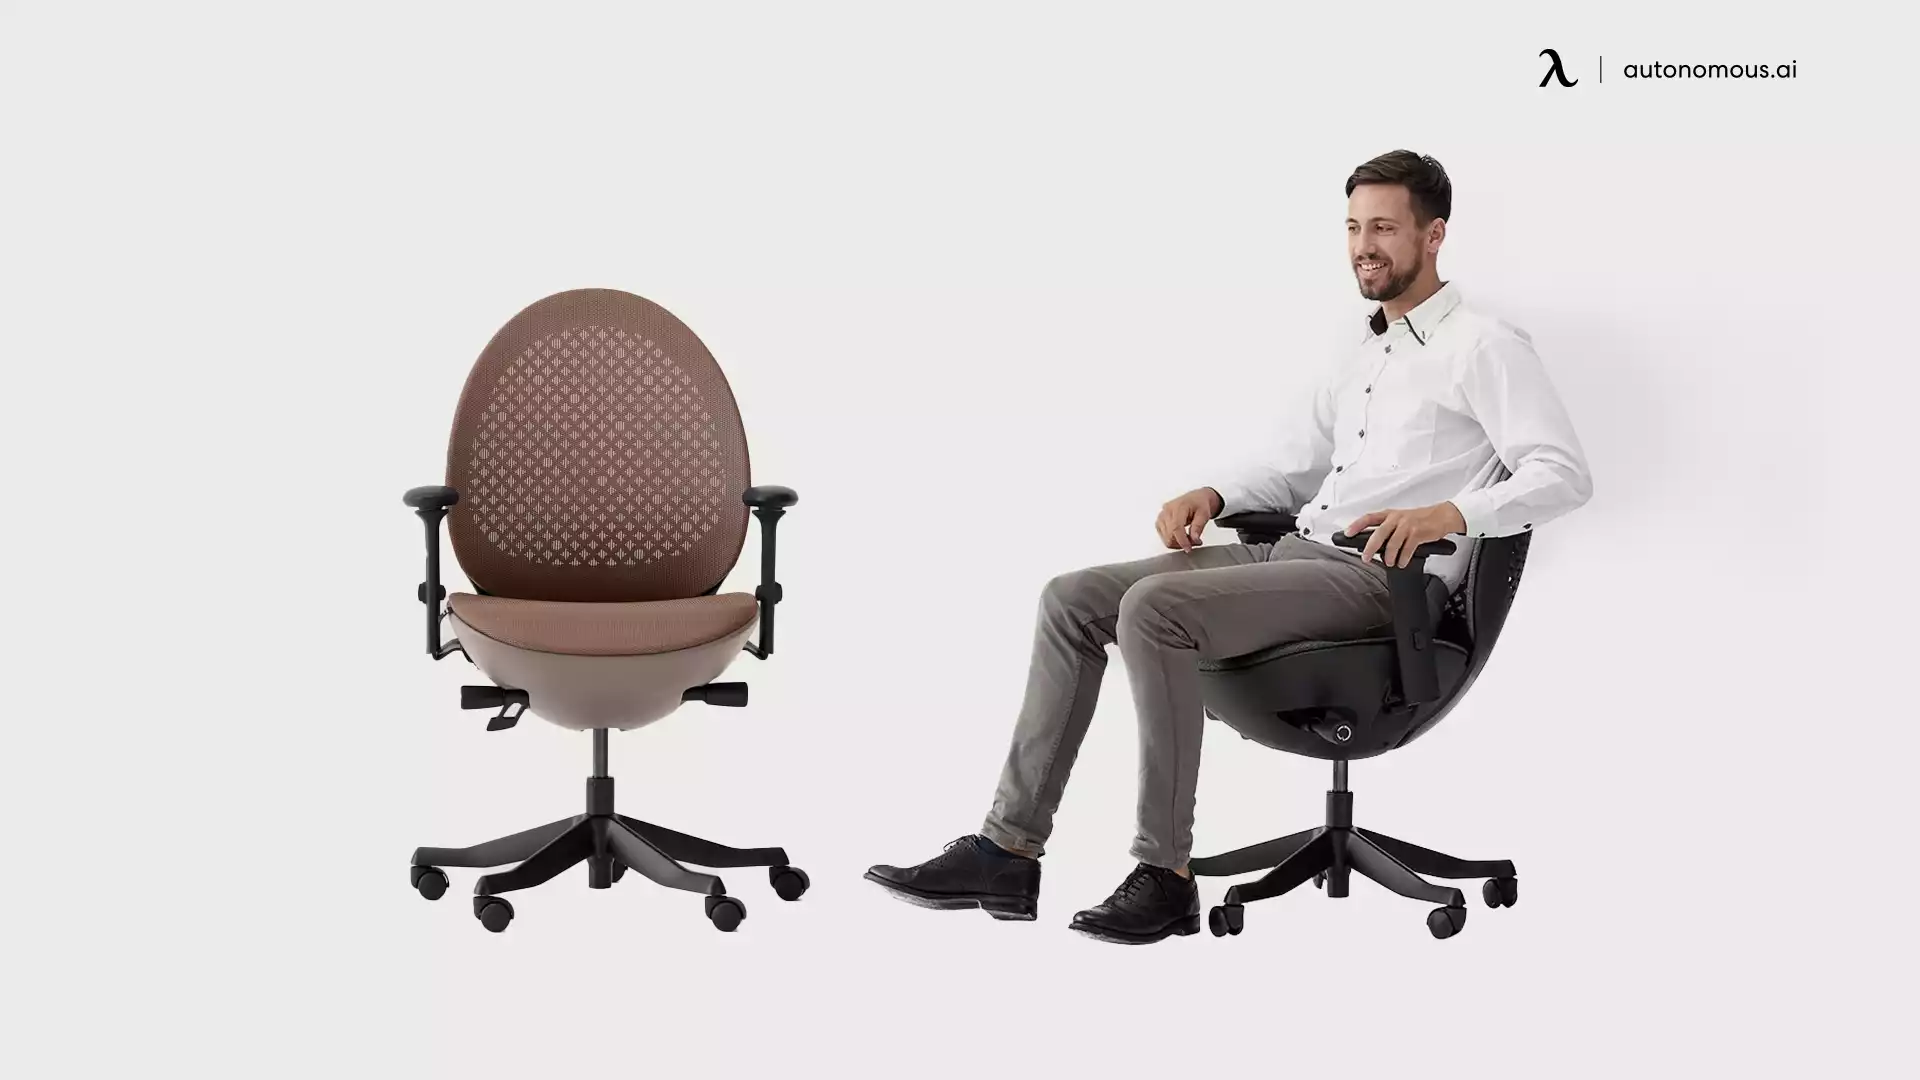 Invest in an Eco-Friendly Office Chair